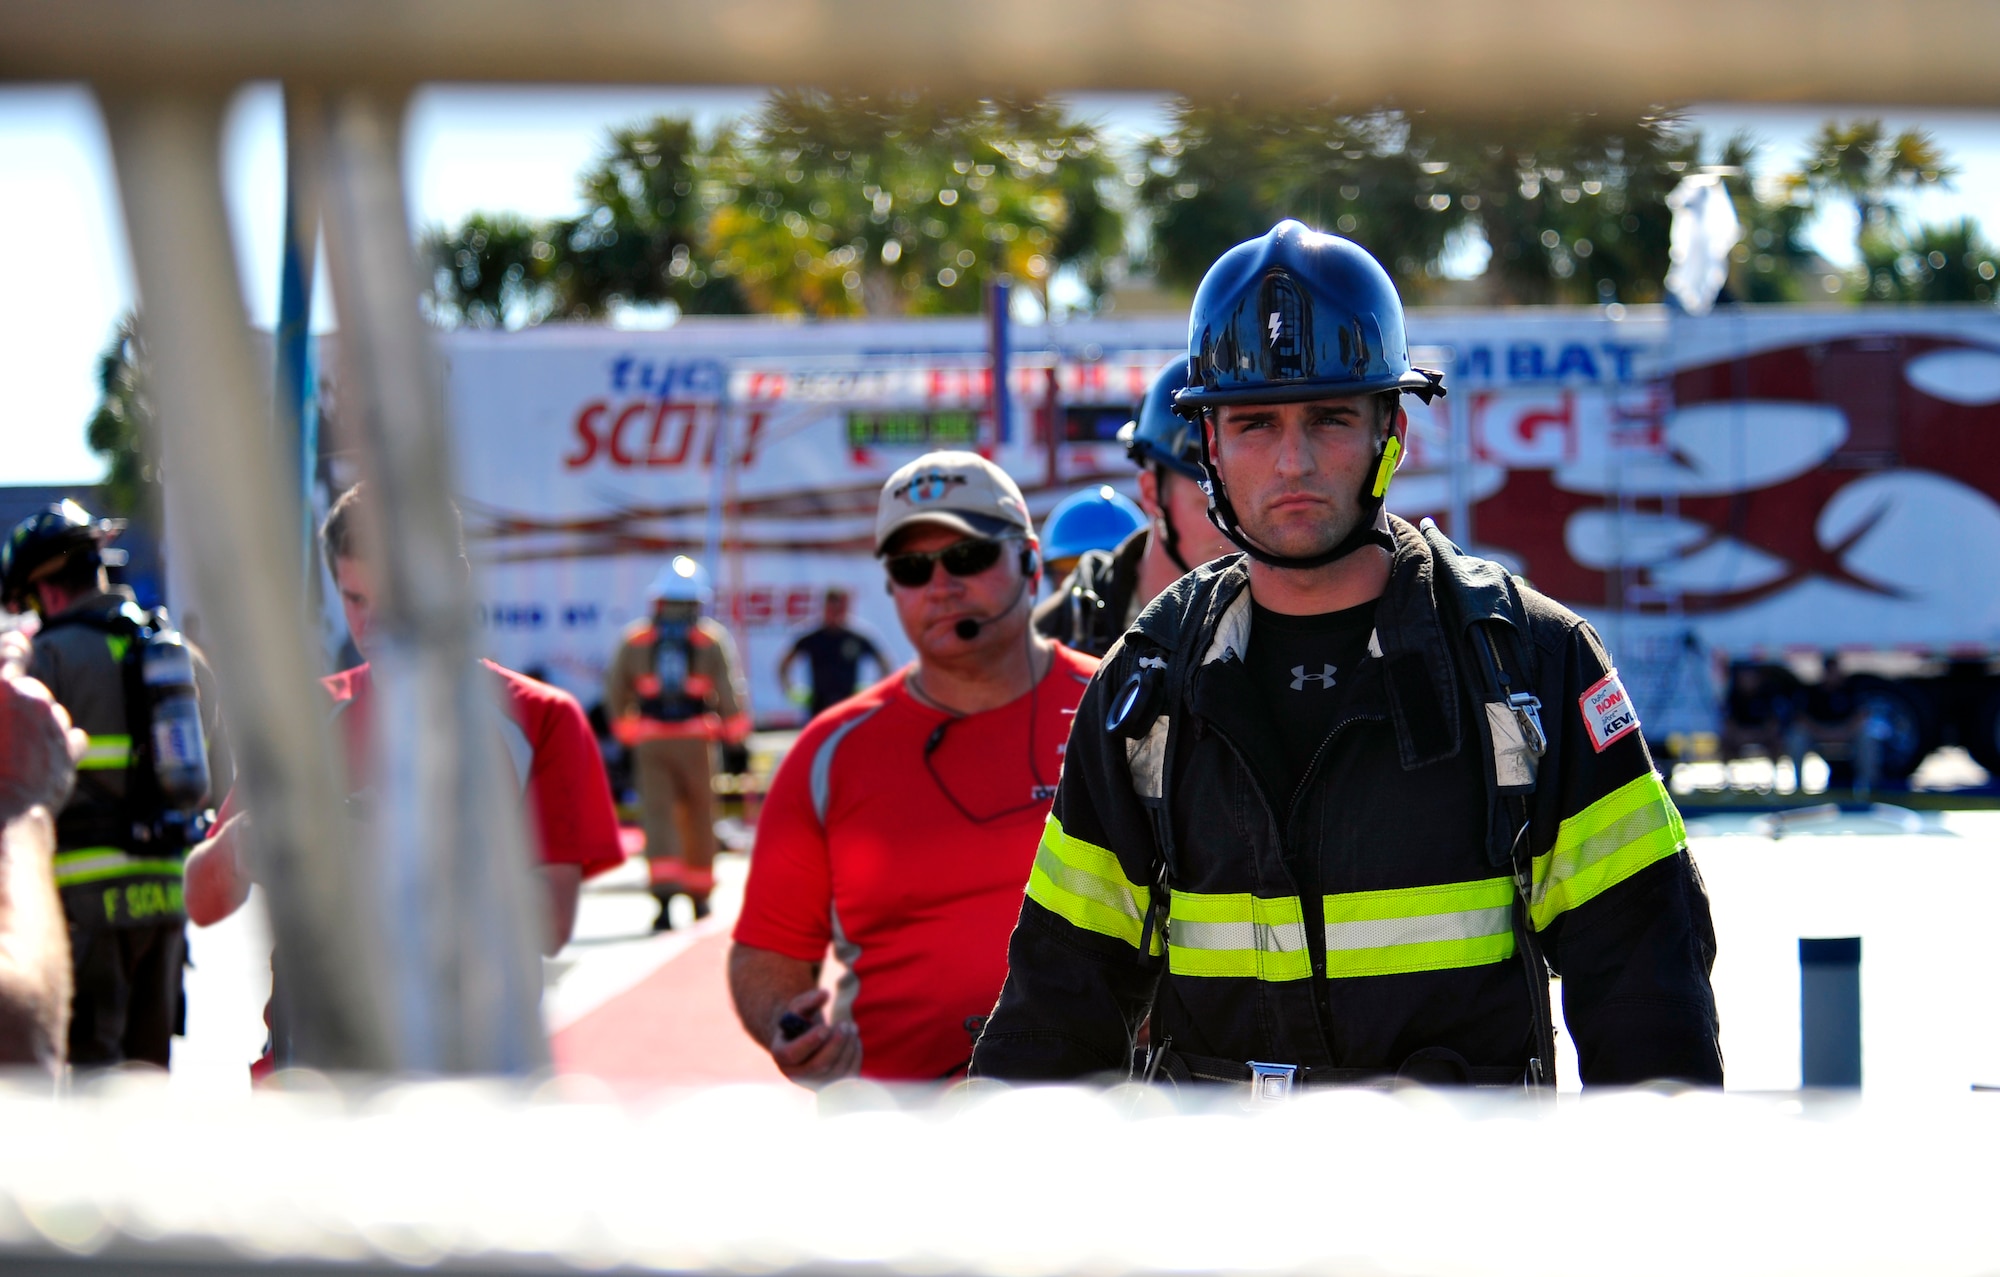 Airman 1st Class Robert Dentici, 20th Civil Engineer Squadron firefighter, gets ready to climb the stairs for the five-man relay at Scott Firefighter Combat Challenge at Myrtle Beach, S.C. Nov.14, 2011. The 20th CES firefighters competed against 180 from across the world. (U.S. Air Force photo/Airman 1st Class Daniel Phelps/Released) 